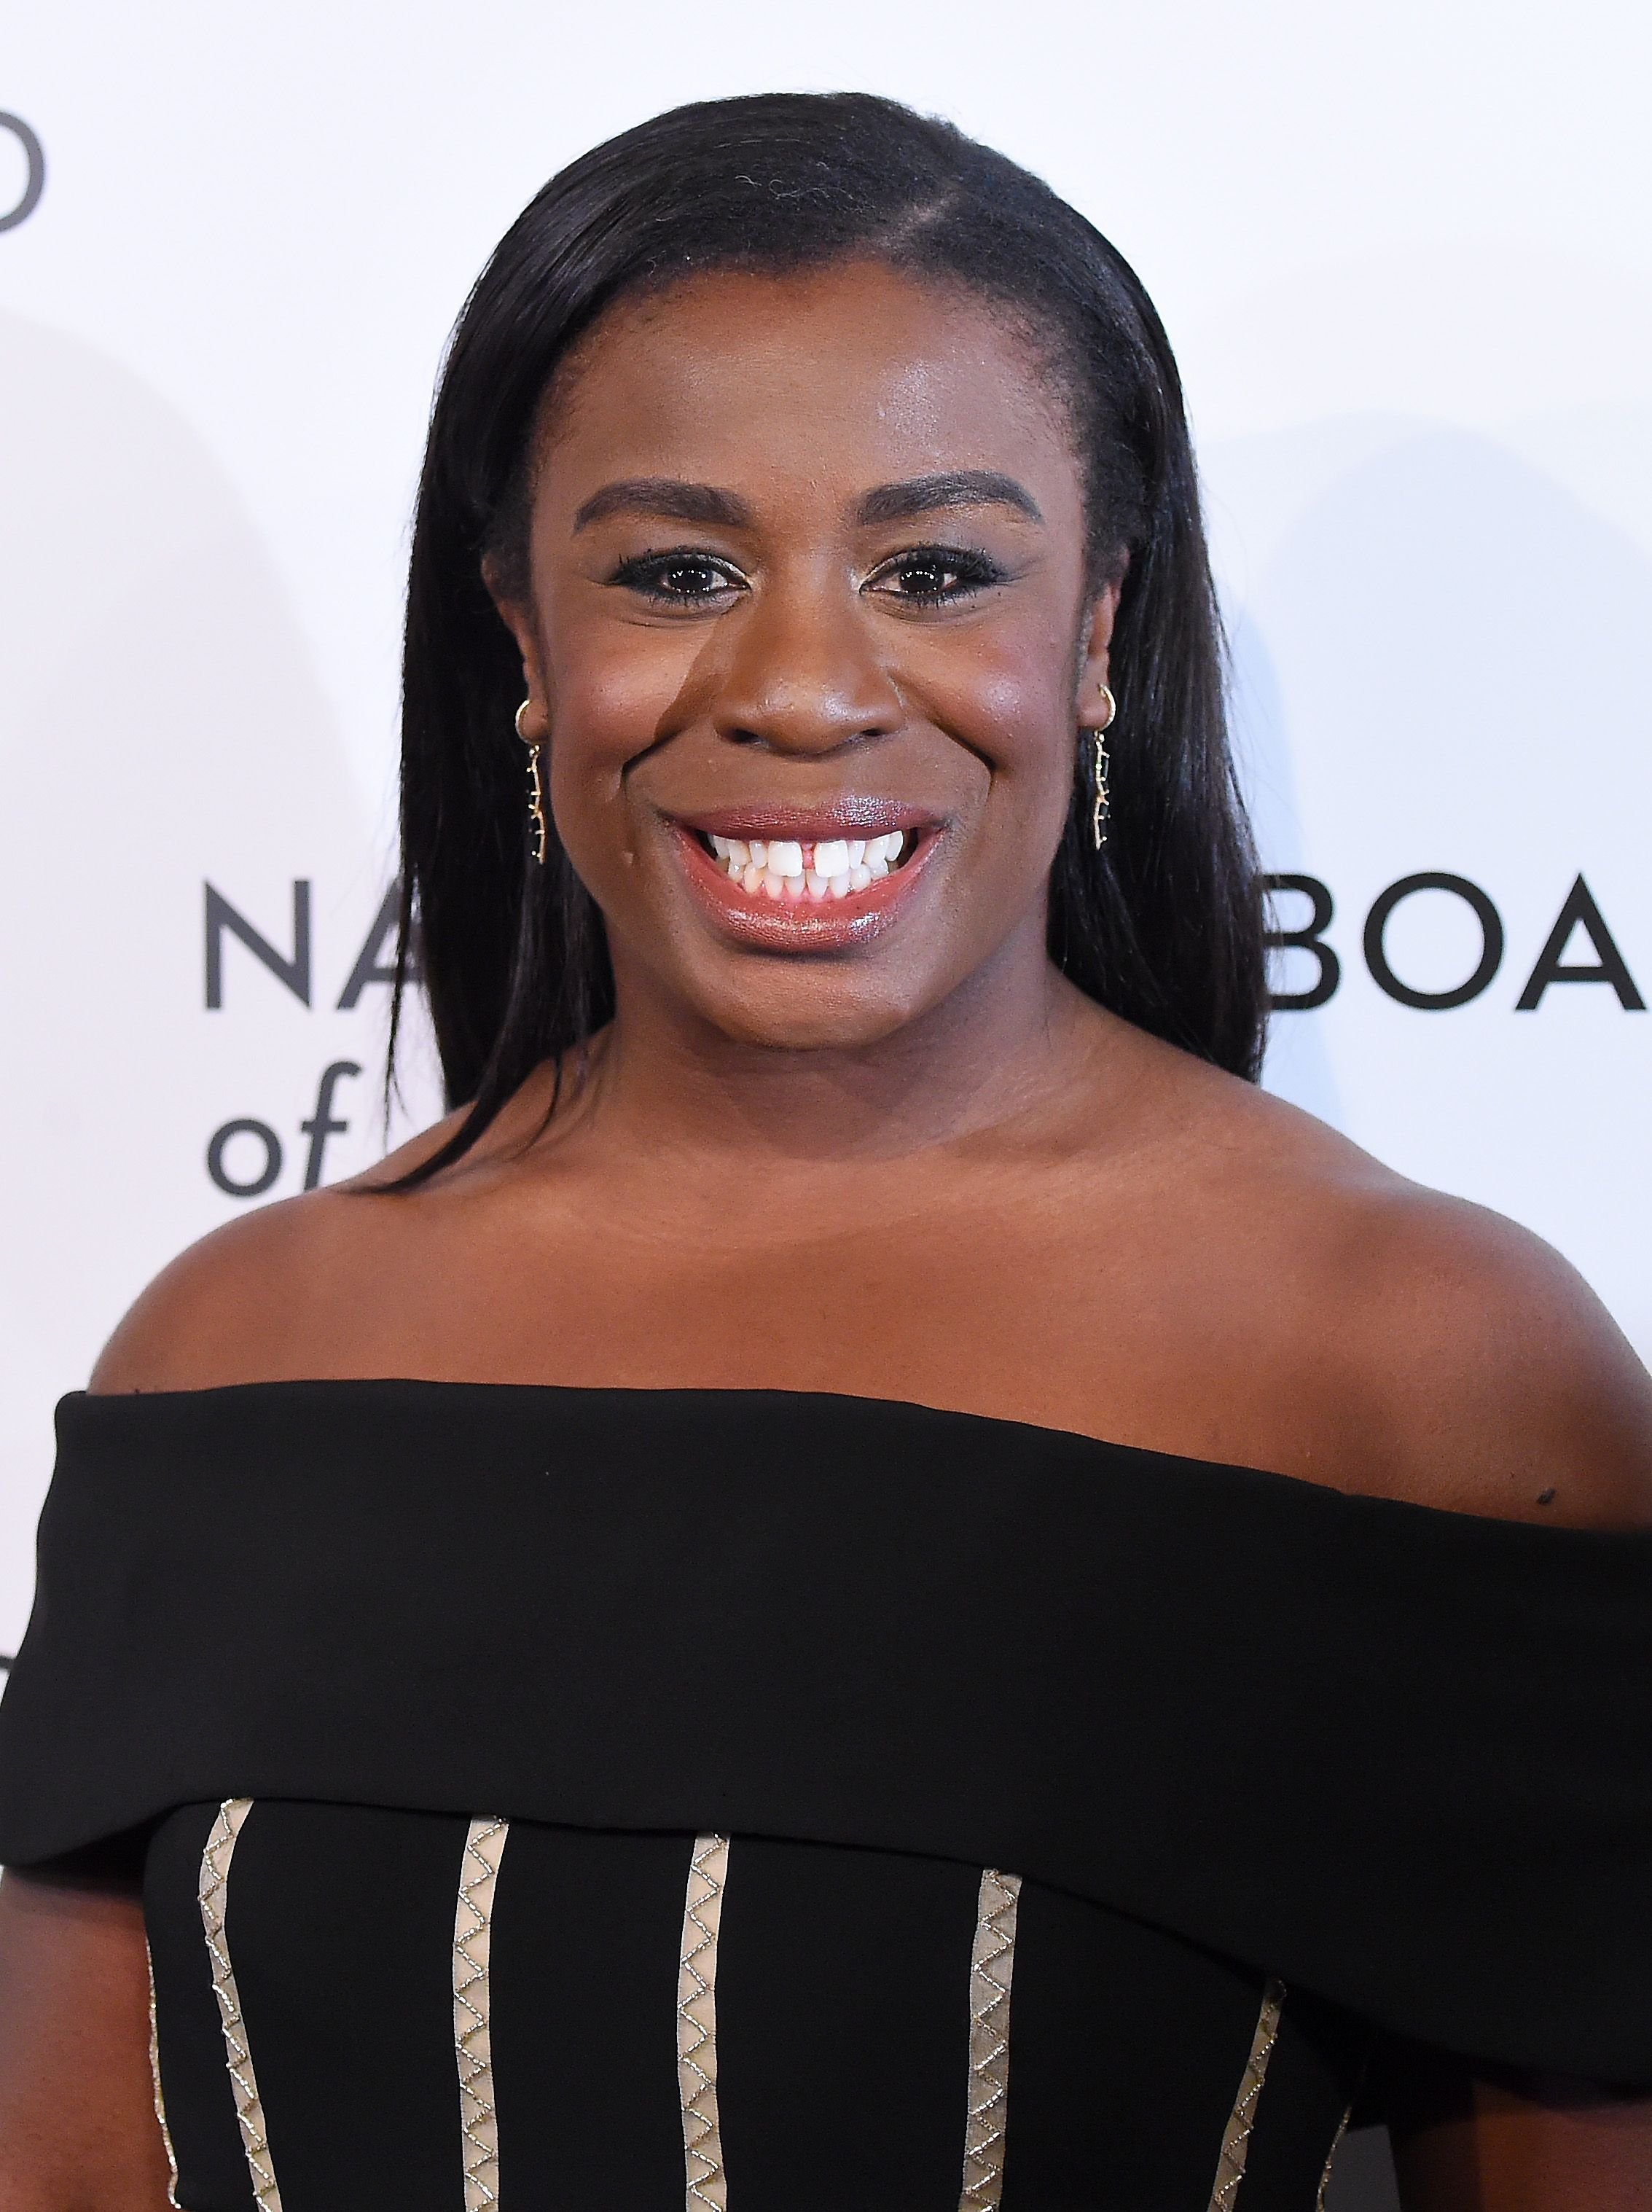  Uzo Aduba at the National Board Of Review Gala at Cipriani 42nd Street on January 08, 2019 in New York City | Photo: Getty Images 